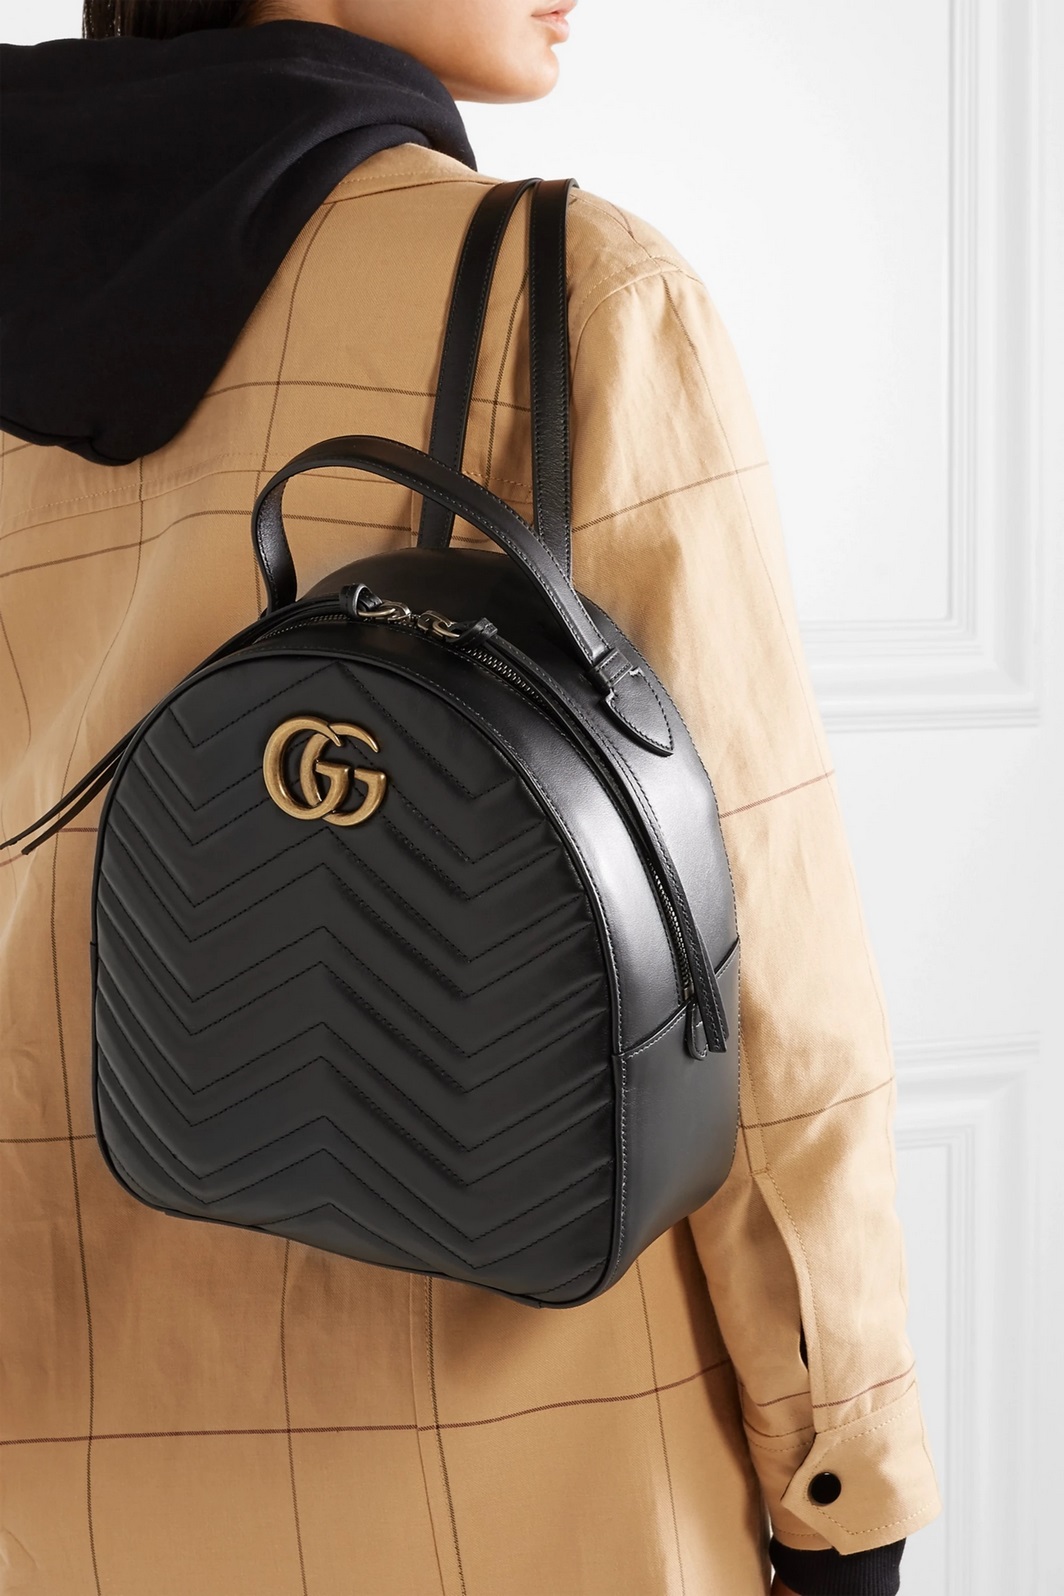 BALO NỮ GUCCI MARMONT BACKPACK 19